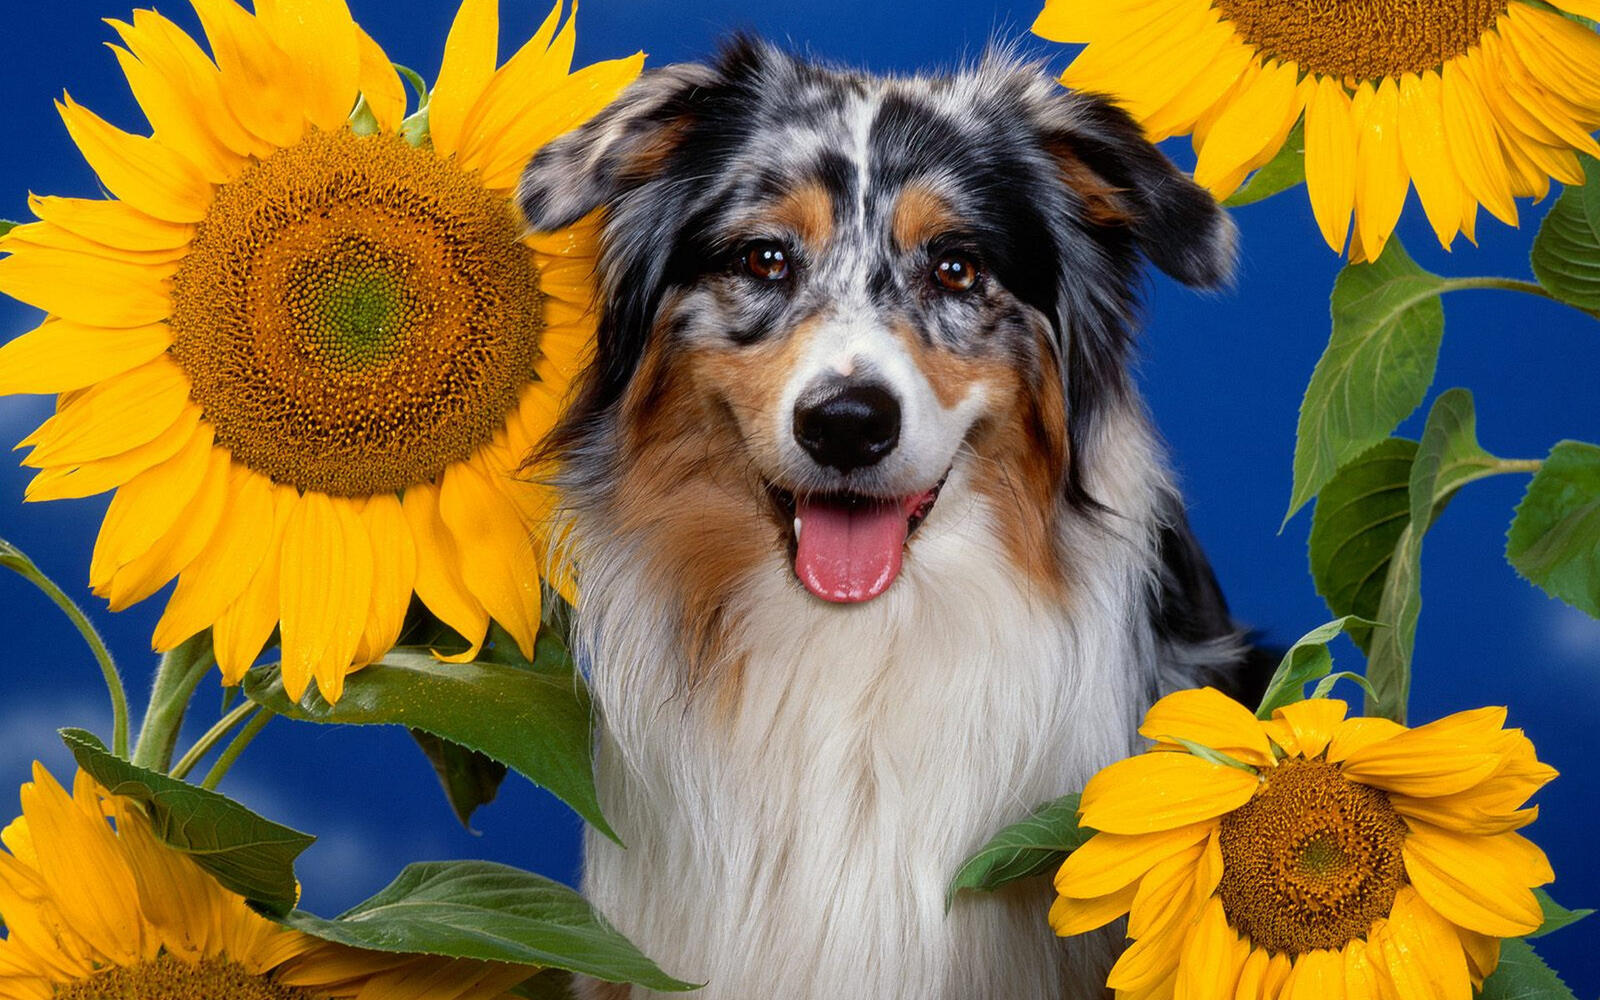 Wallpapers dog tricolor muzzle on the desktop